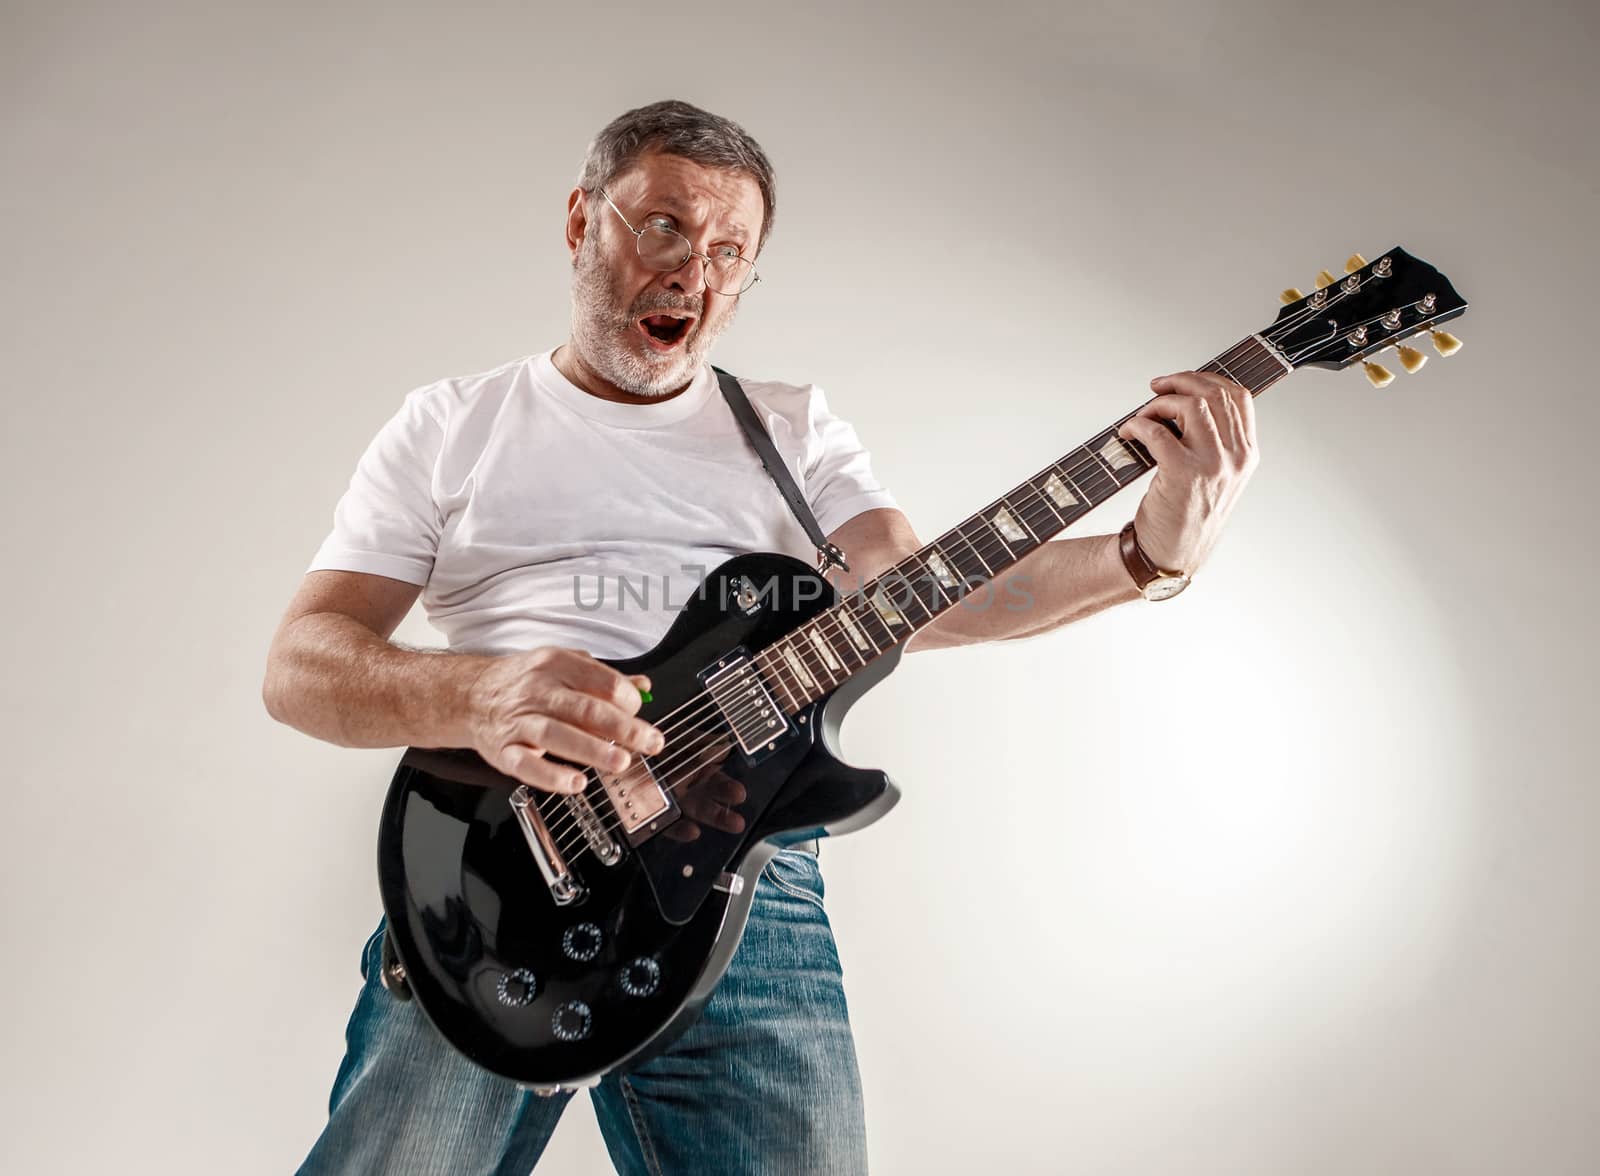 Portrait of a guitar player exciting music on gray background